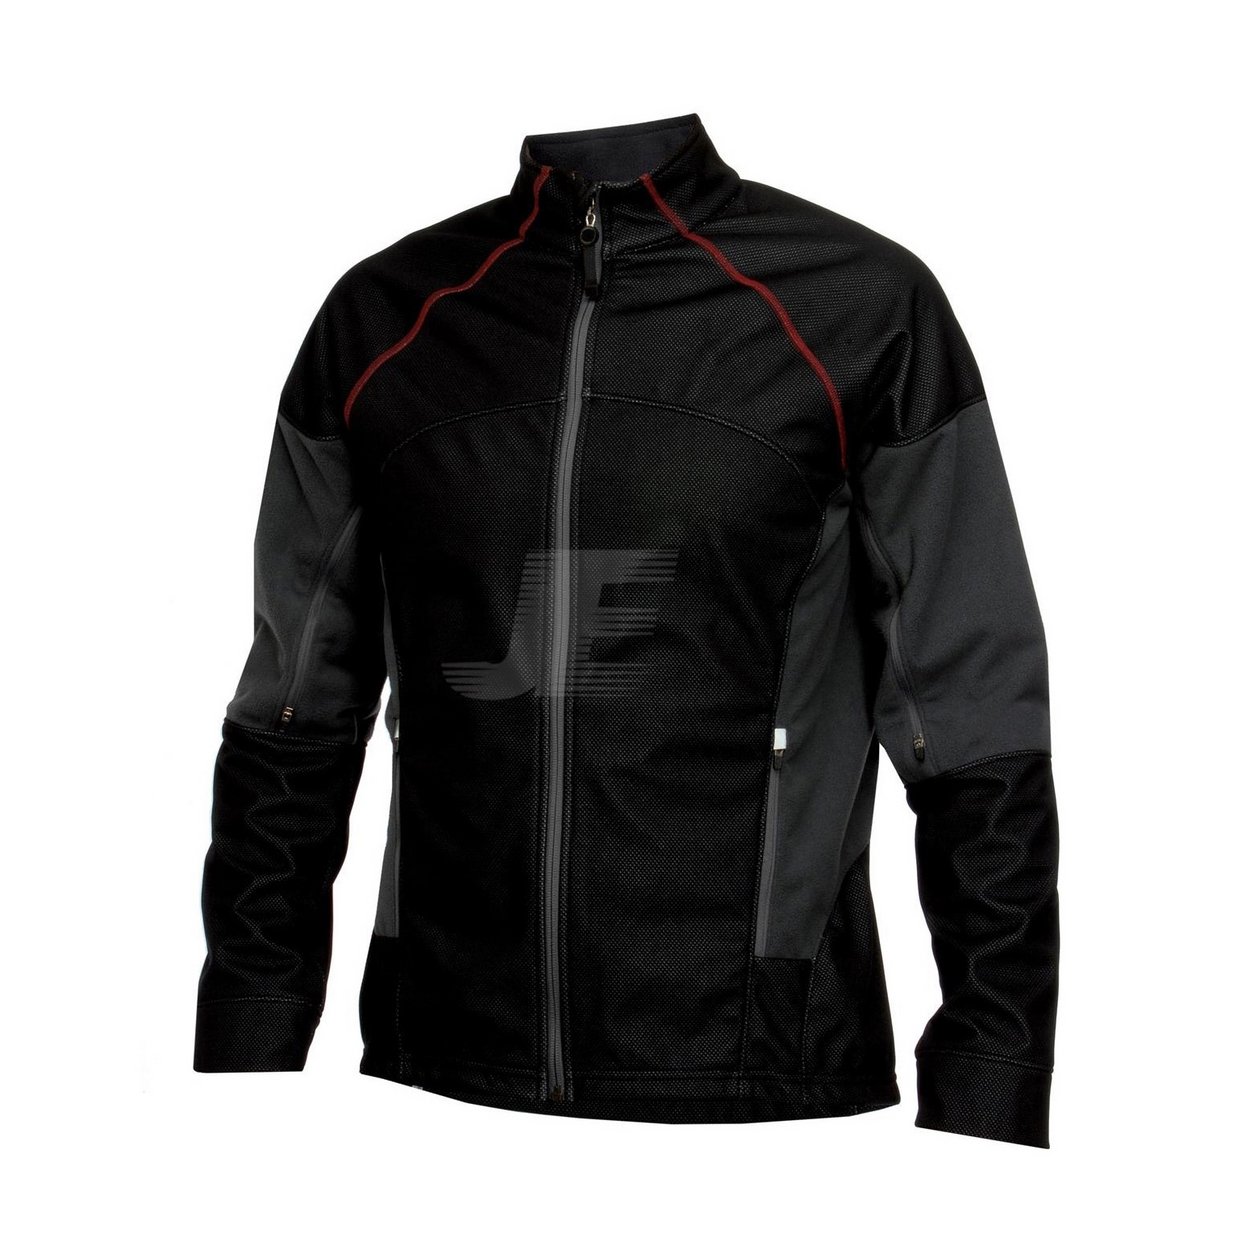 Mens Winter Windproof Textured Fabric Cycling Jacket